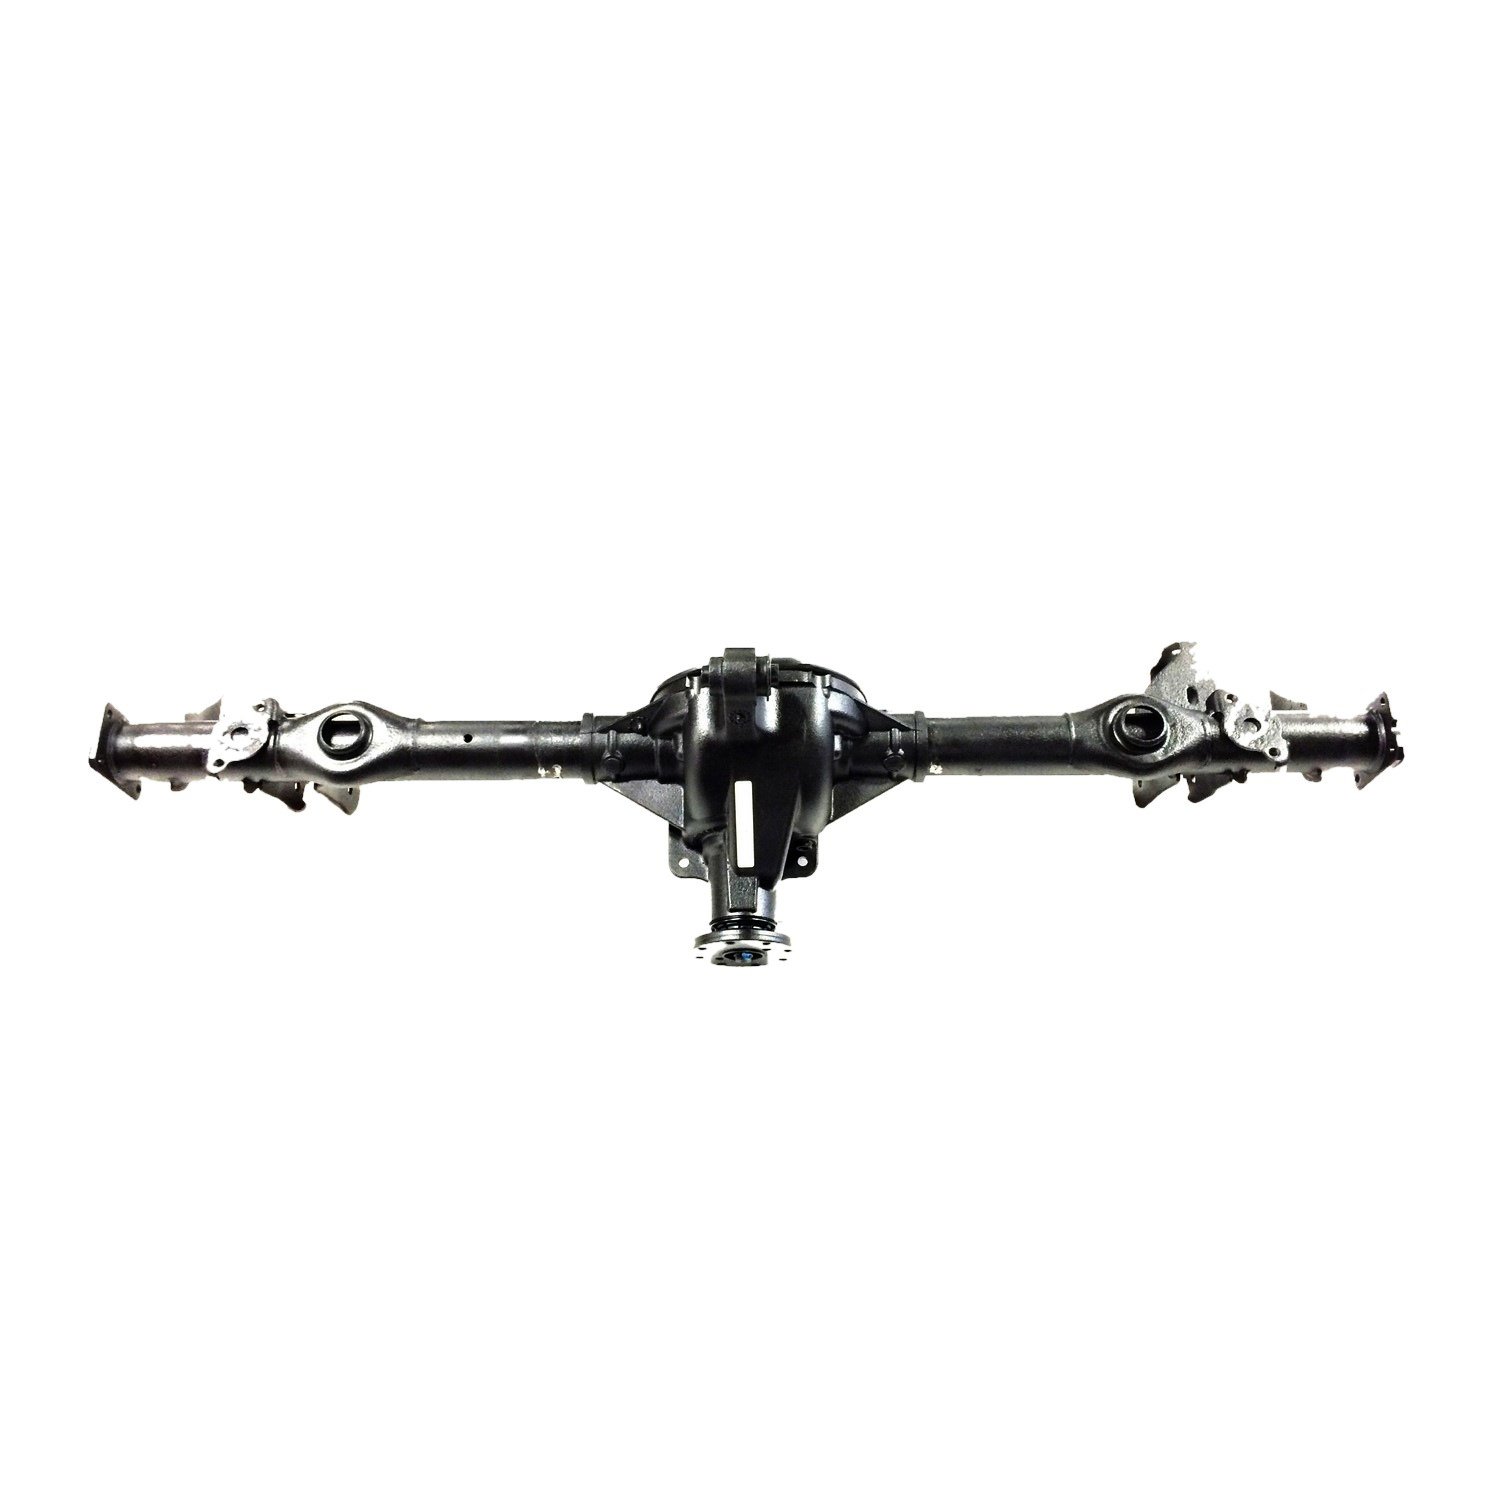 Remanufactured Complete Axle Assembly for 7.5" 99-02 Mustang 3.27 w/o ABS, Posi LSD